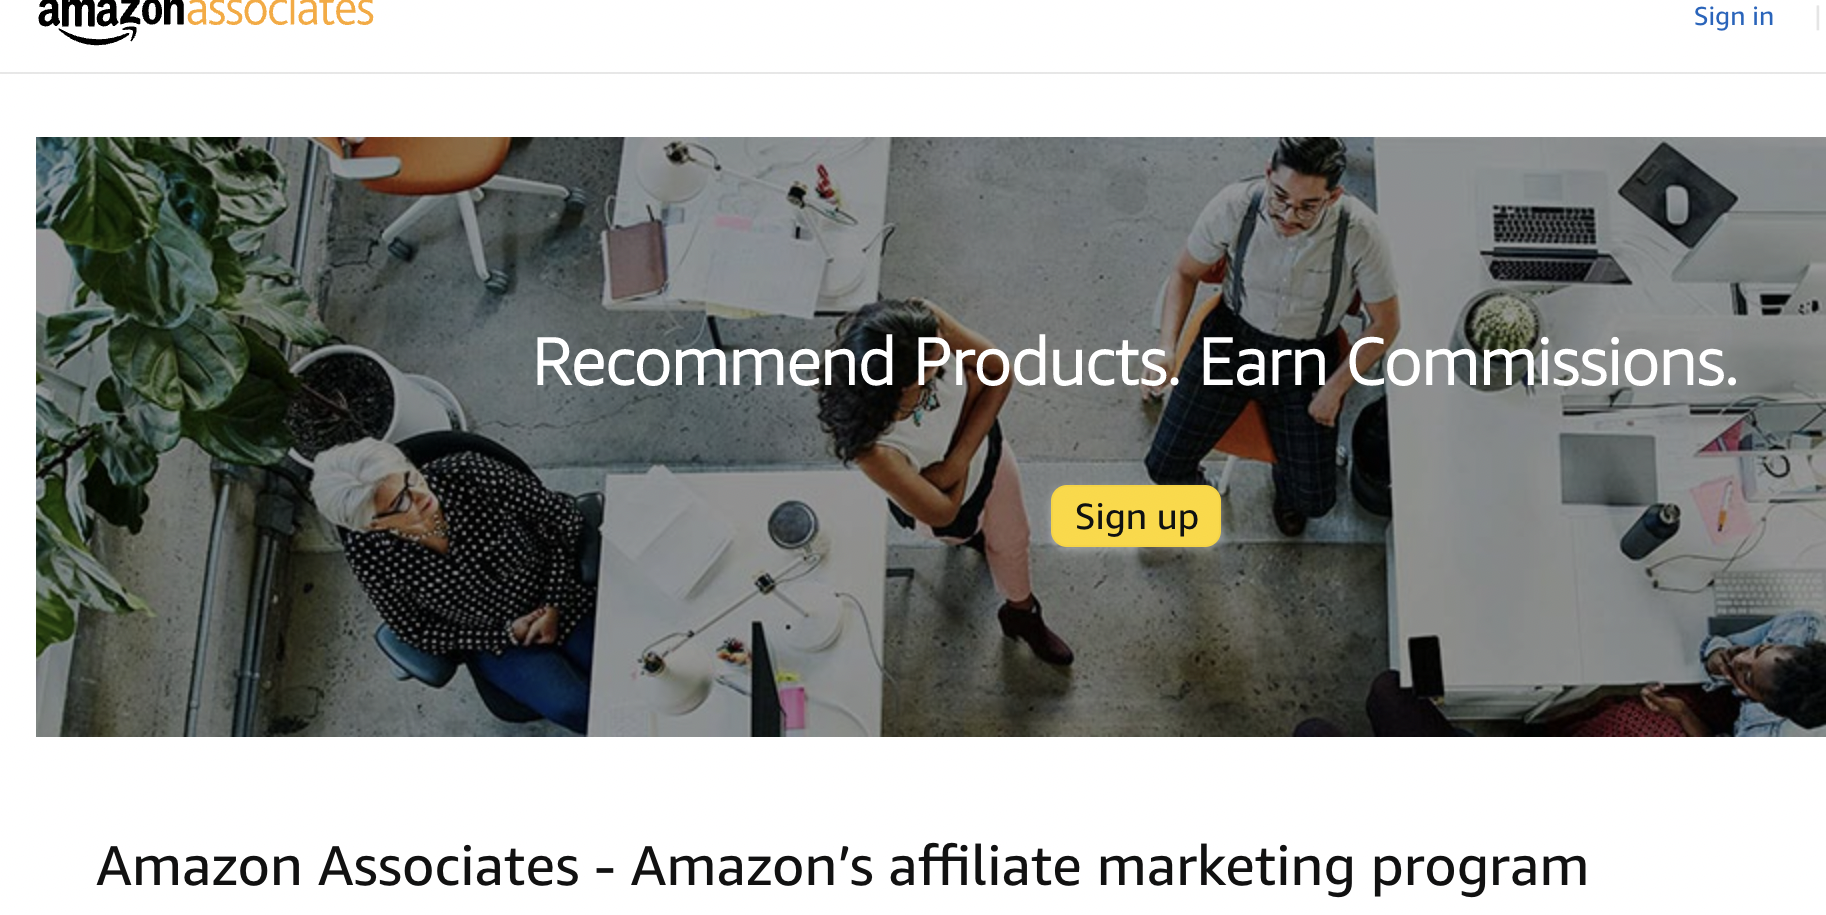 amazon associates amazon influencers the best affiliate marketing programs for beginners